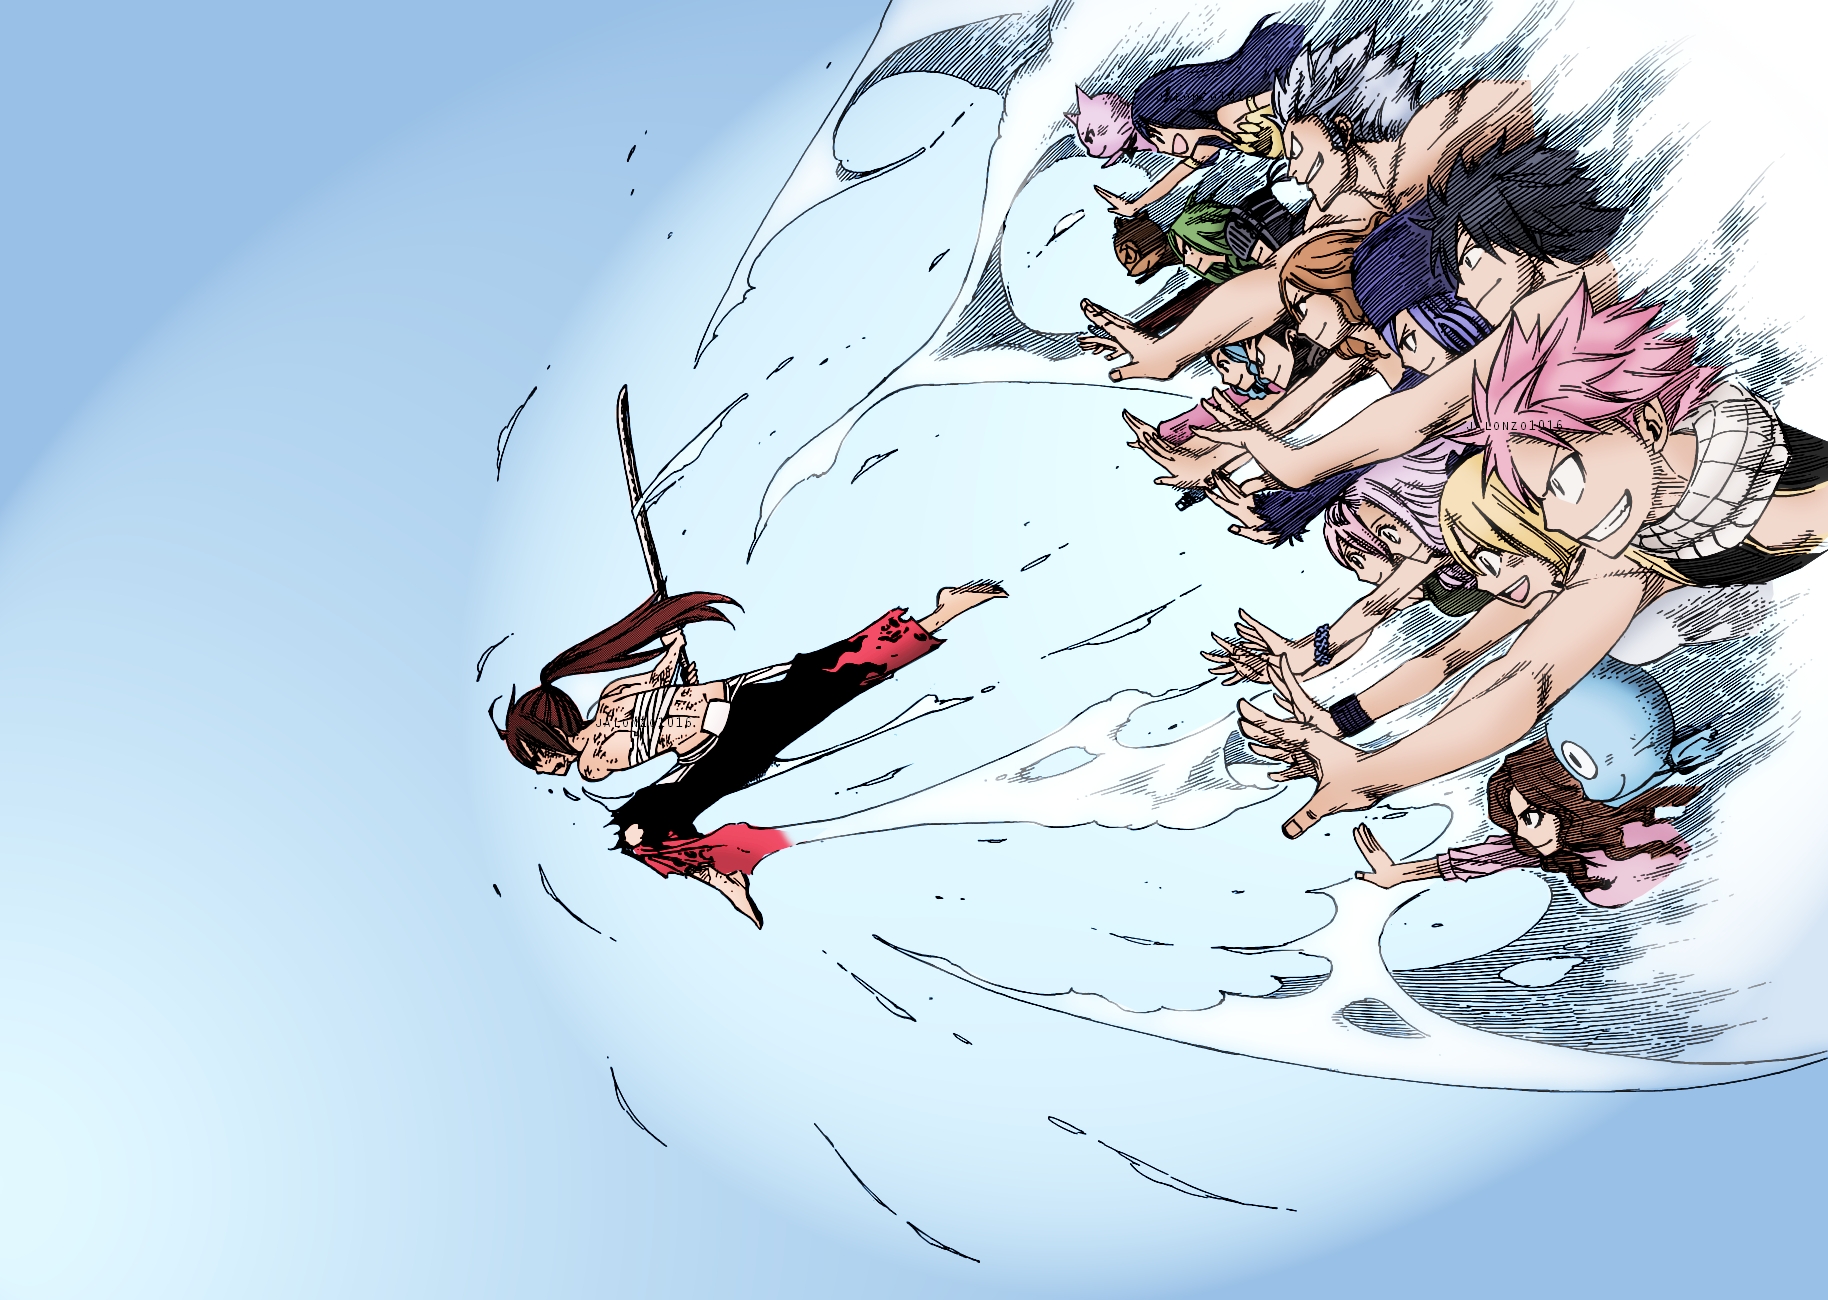 anime, fairy tail, bickslow (fairy tail), cana alberona, charles (fairy tail), elfman strauss, erza scarlet, evergreen (fairy tail), freed justine, gray fullbuster, happy (fairy tail), juvia lockser, levy mcgarden, lisanna strauss, lucy heartfilia, mirajane strauss, natsu dragneel, panther lily (fairy tail), wendy marvell